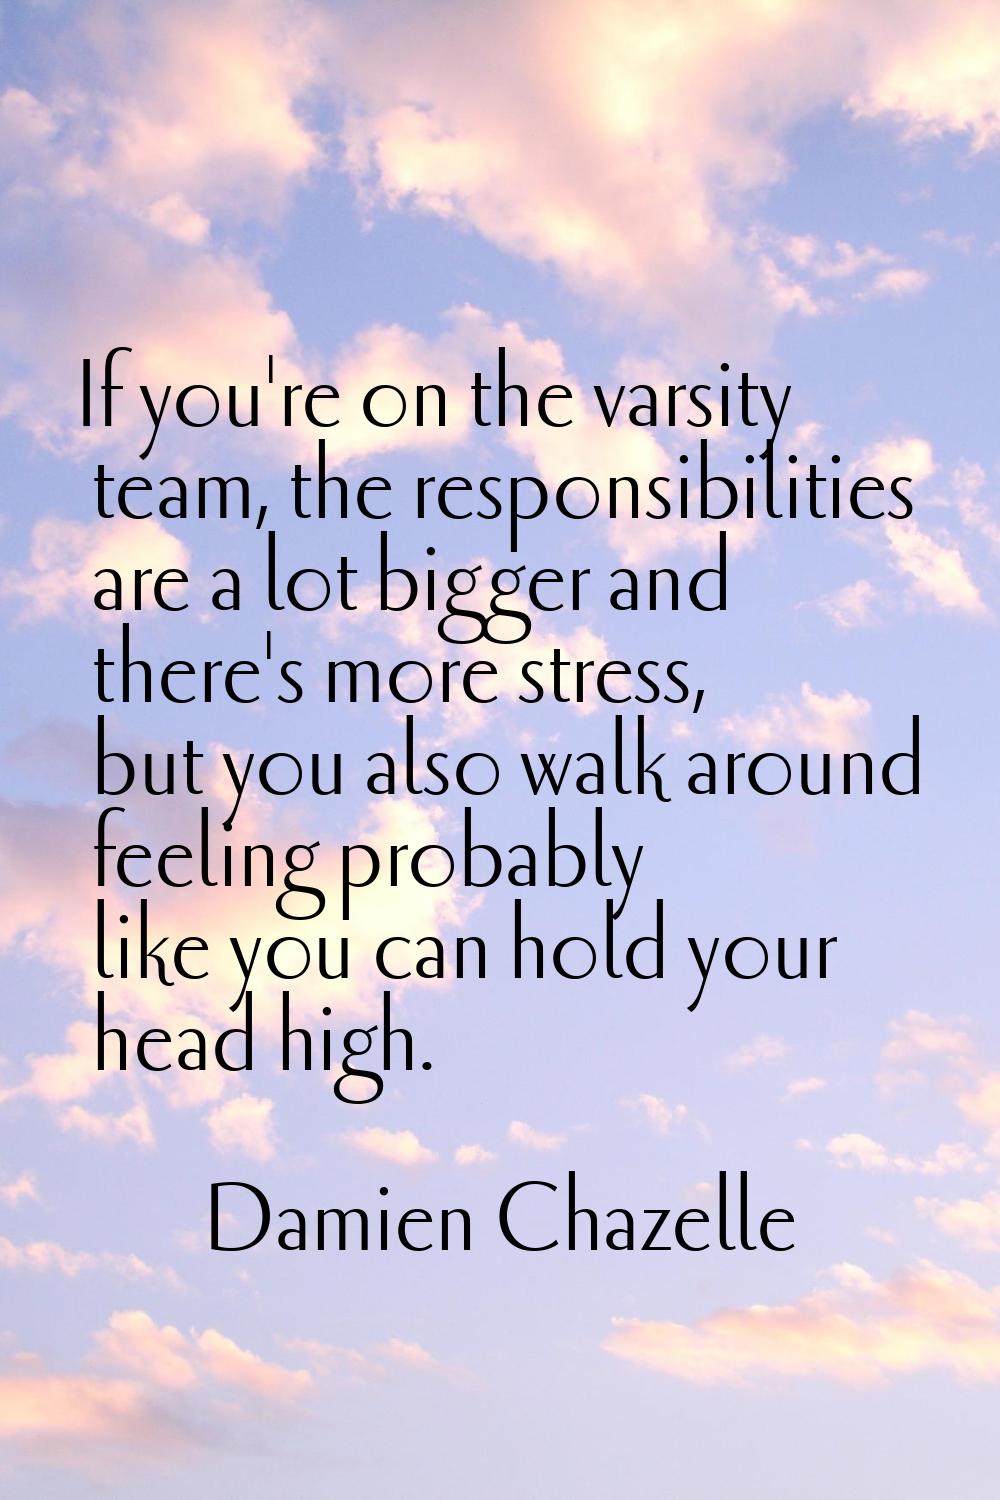 If you're on the varsity team, the responsibilities are a lot bigger and there's more stress, but y